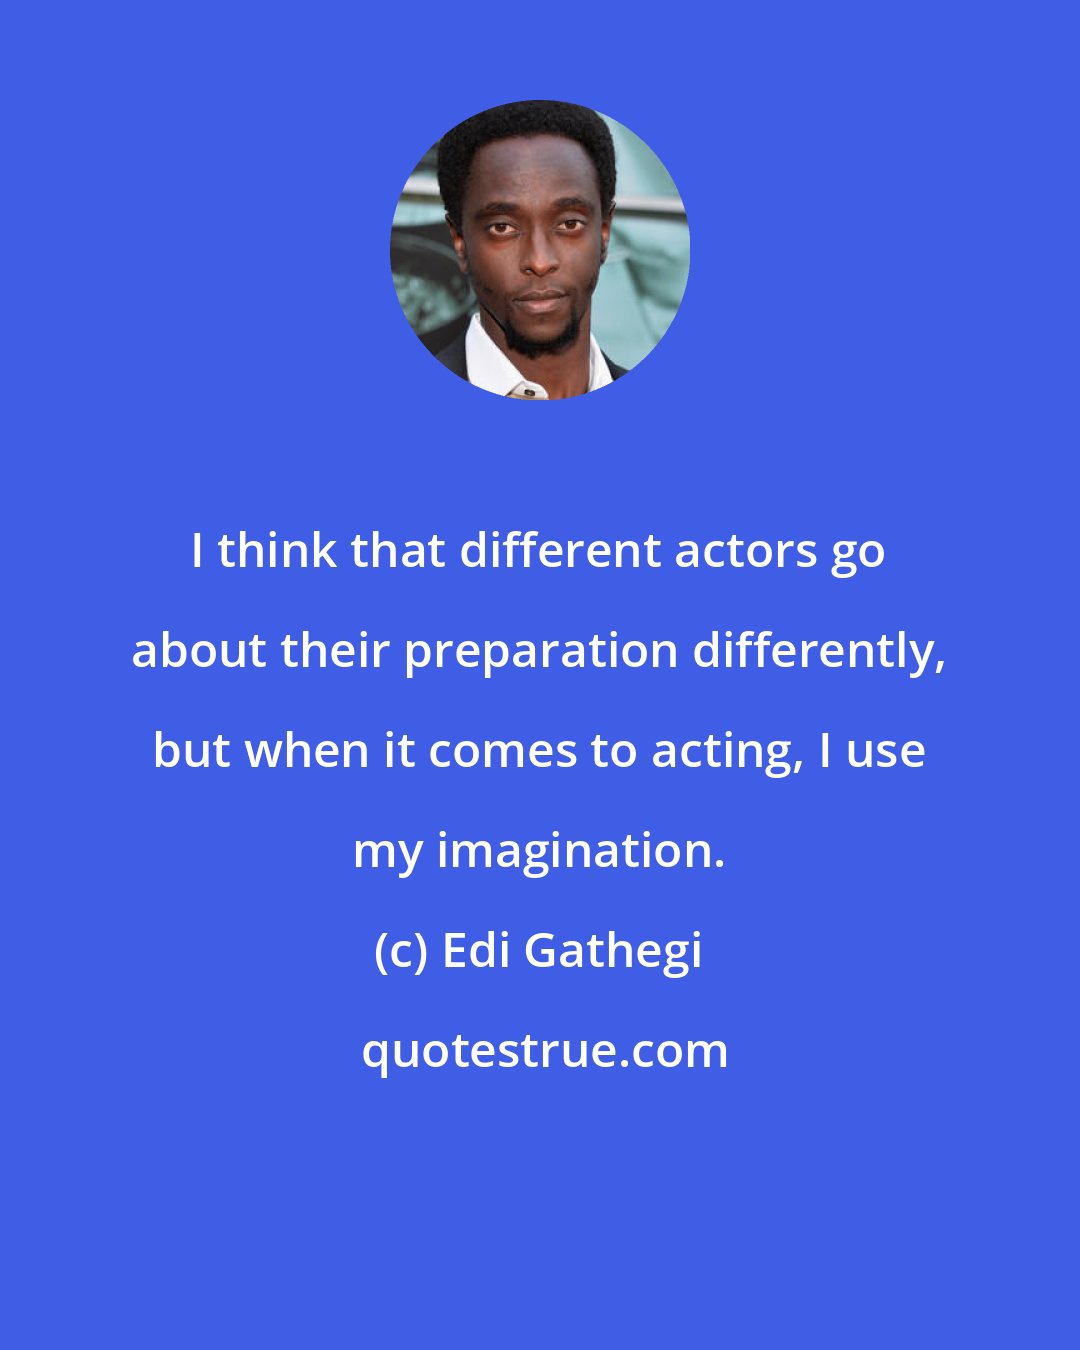 Edi Gathegi: I think that different actors go about their preparation differently, but when it comes to acting, I use my imagination.